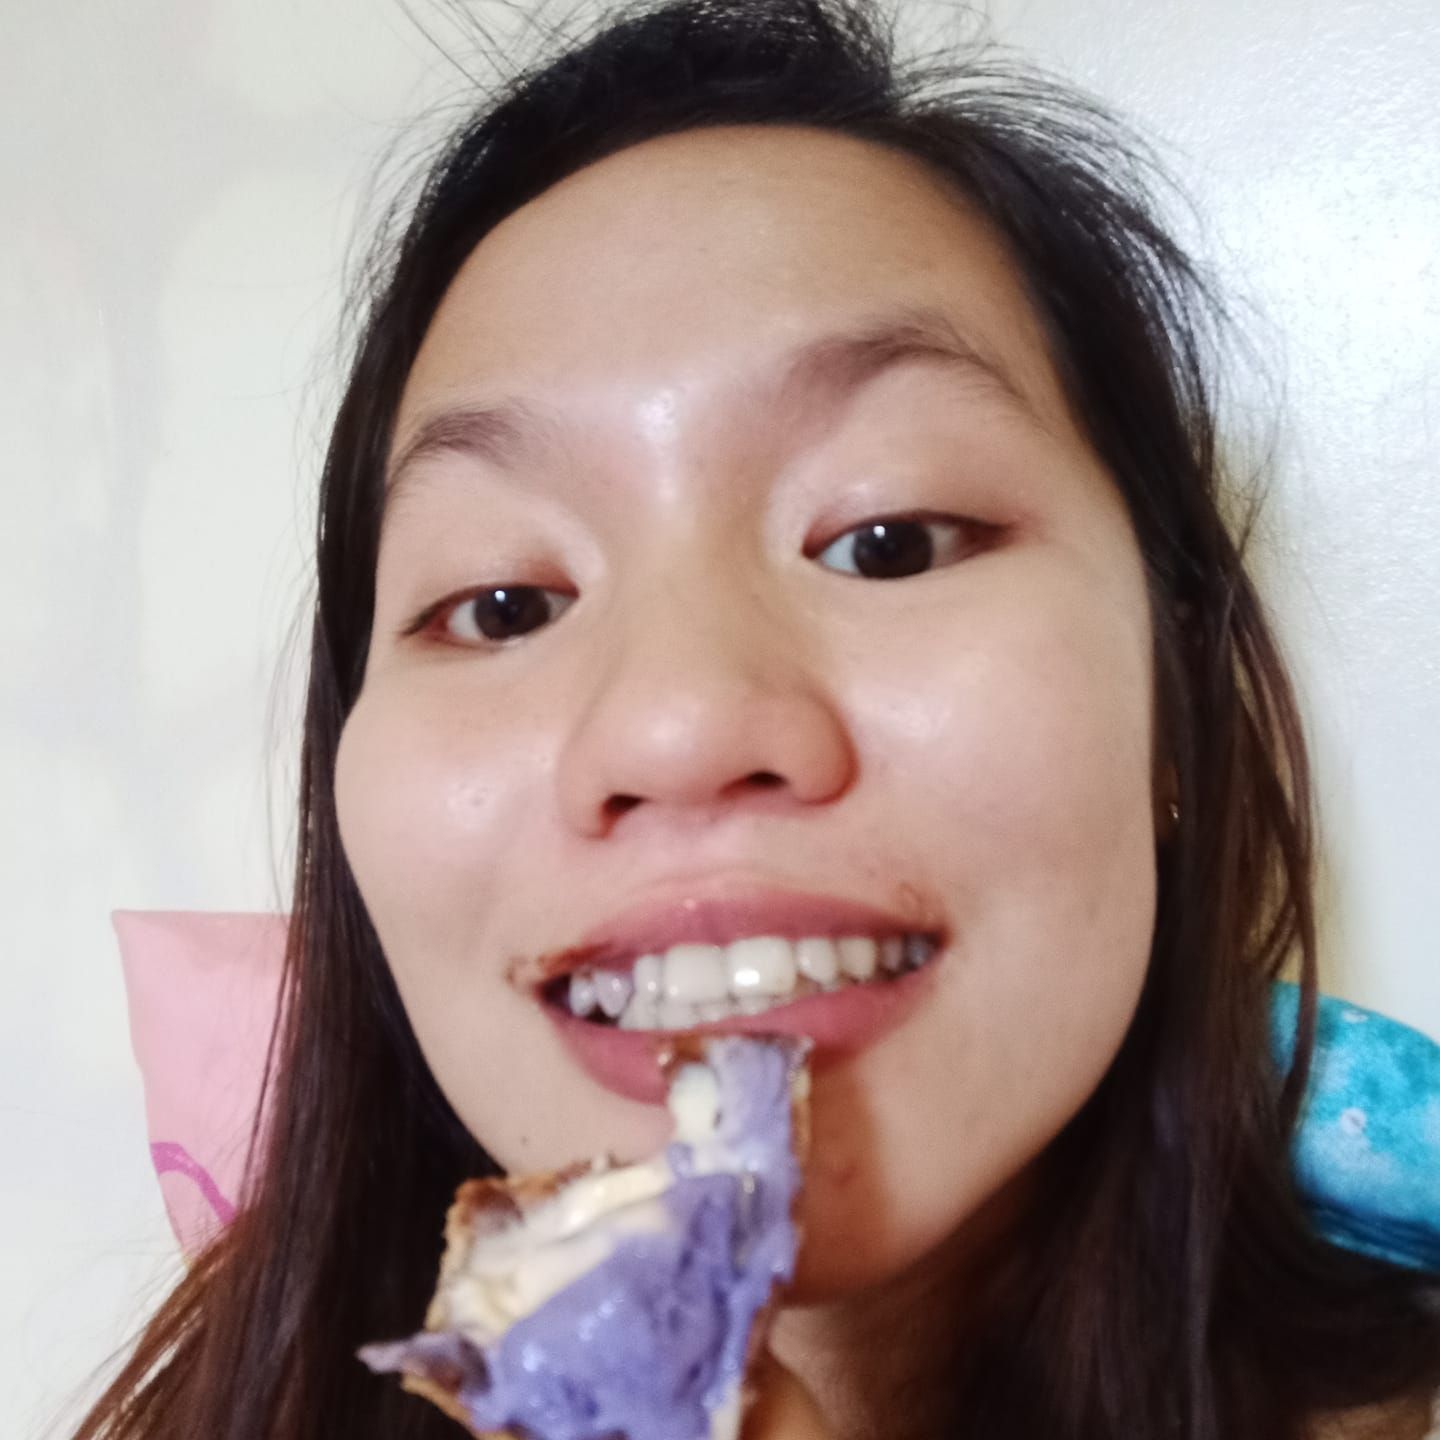 A random photo shot in my room as I comfortably enjoy eating that ice cream 🍦